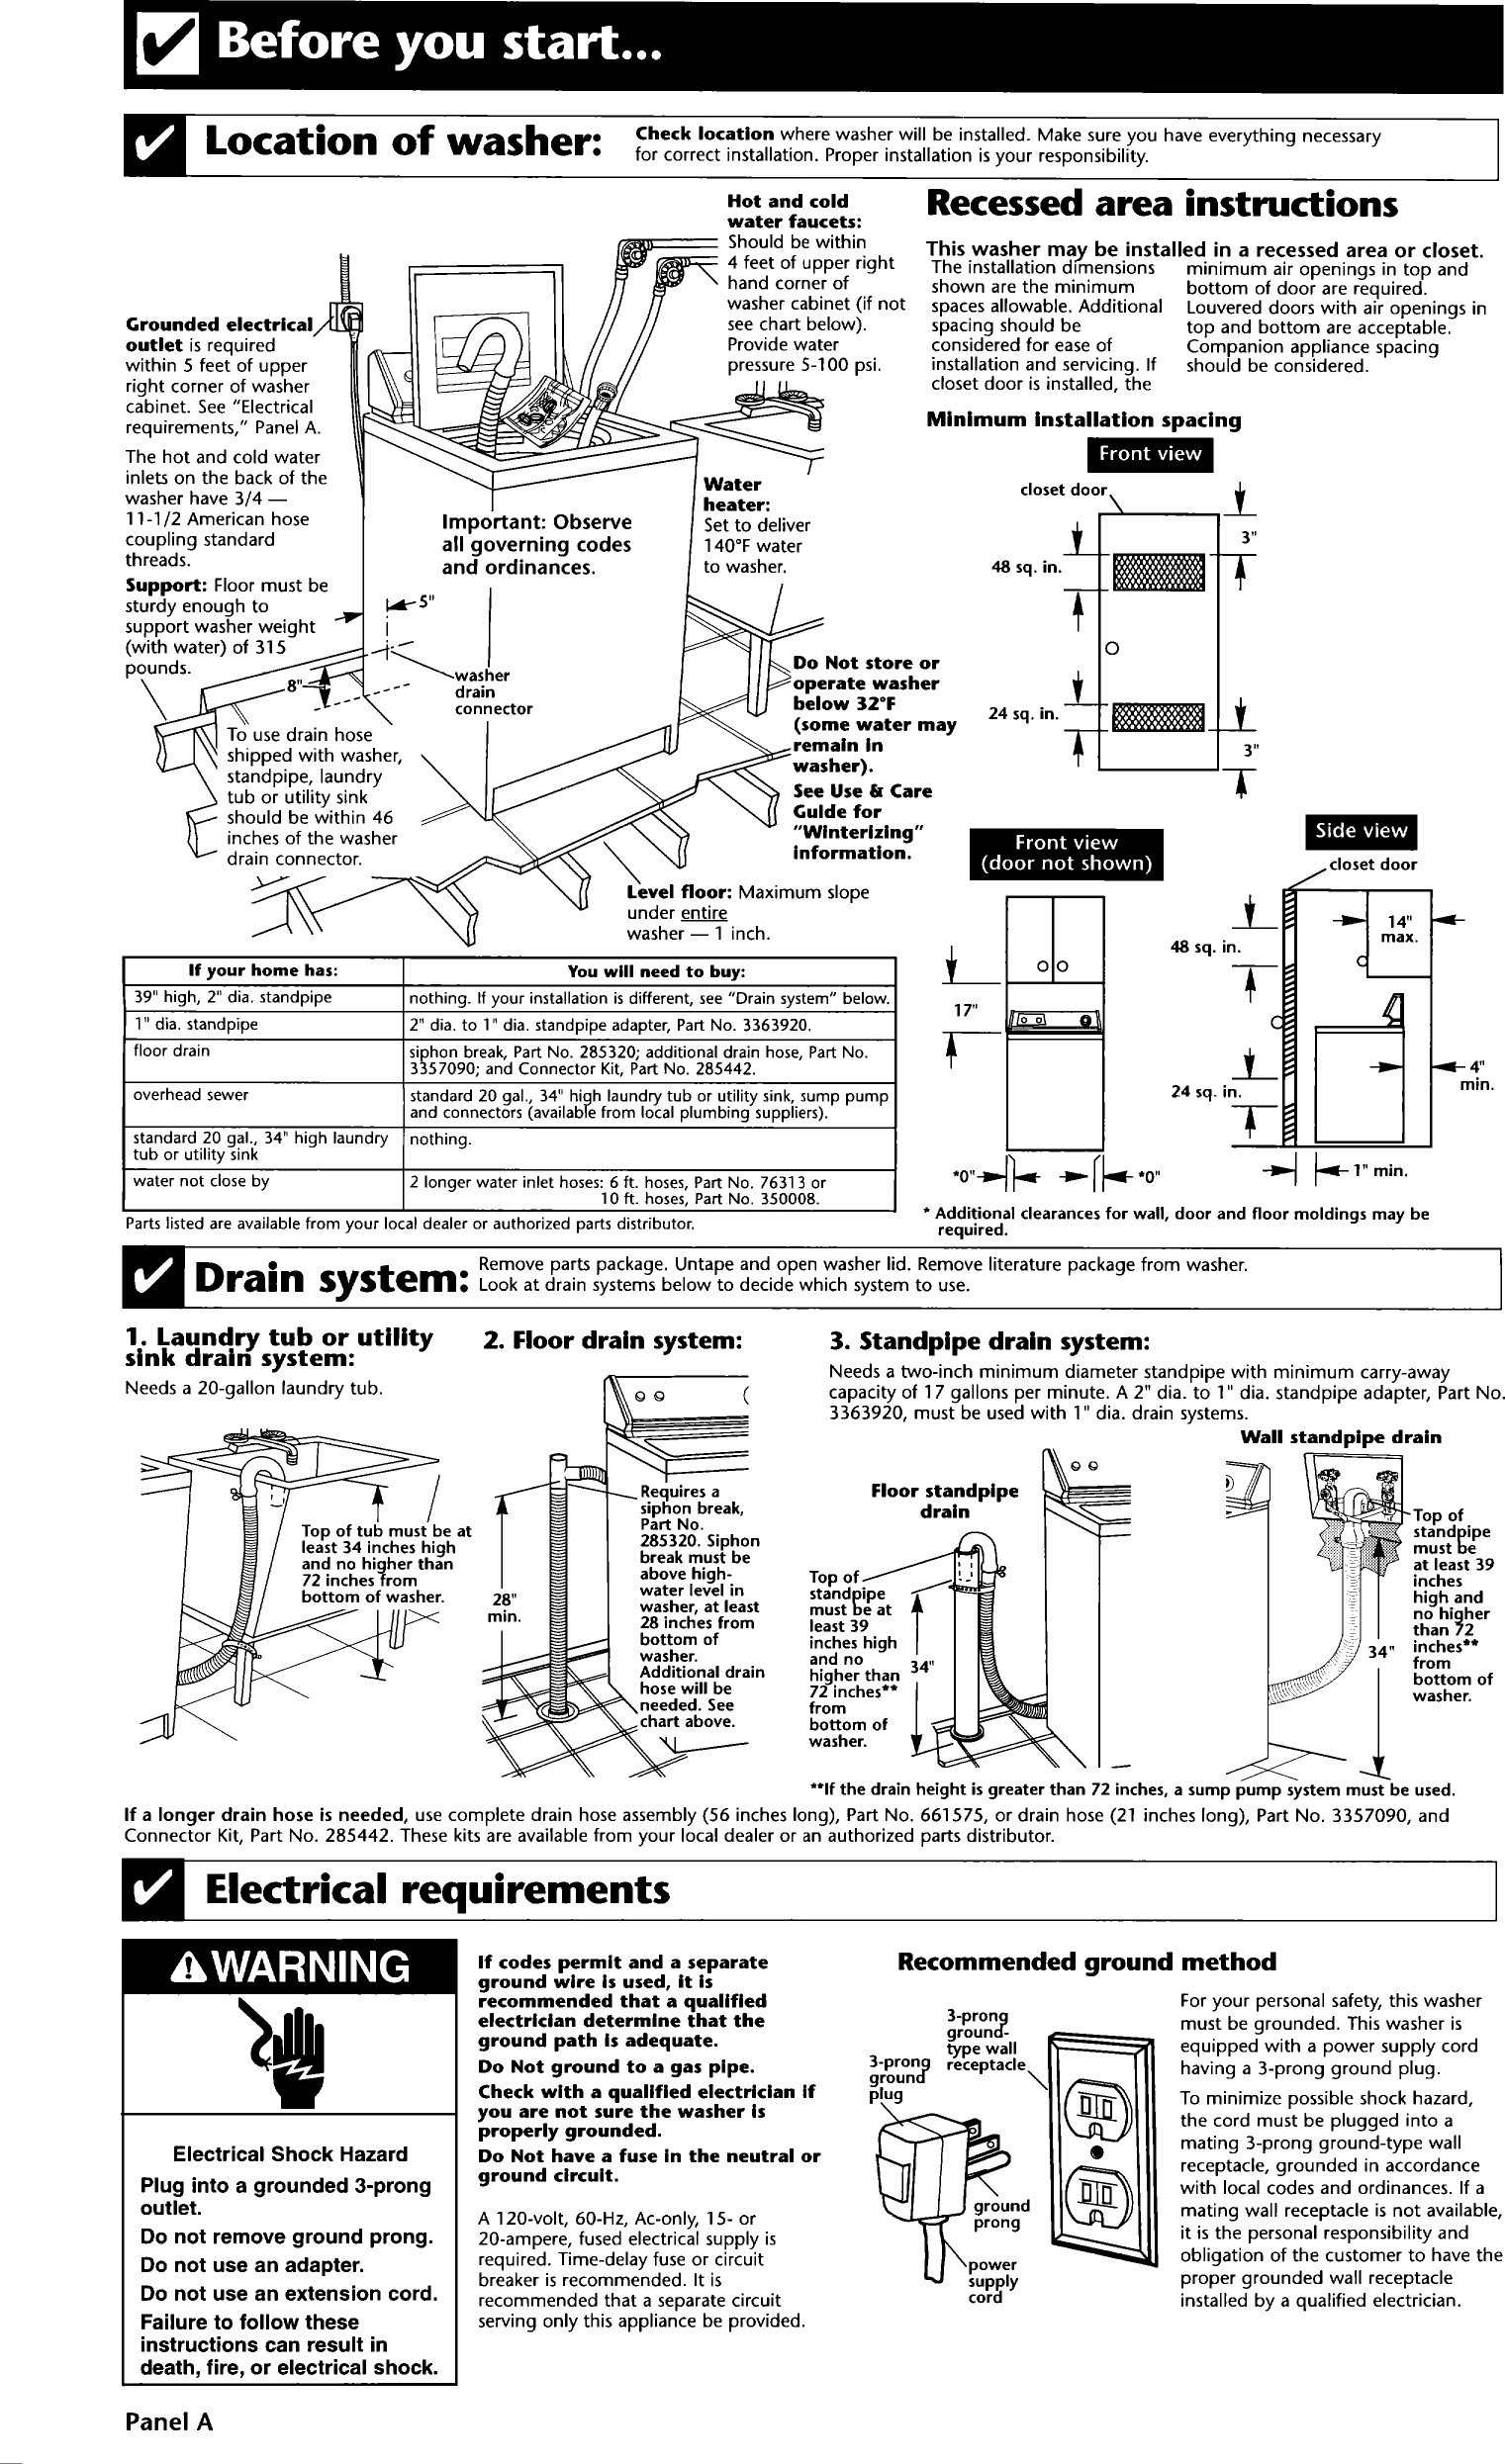 Page 2 of 5 - Whirlpool LSR8233EQ0 User Manual  HOME WASHERS DIRECT-DRIVE - Manuals And Guides 1506155L